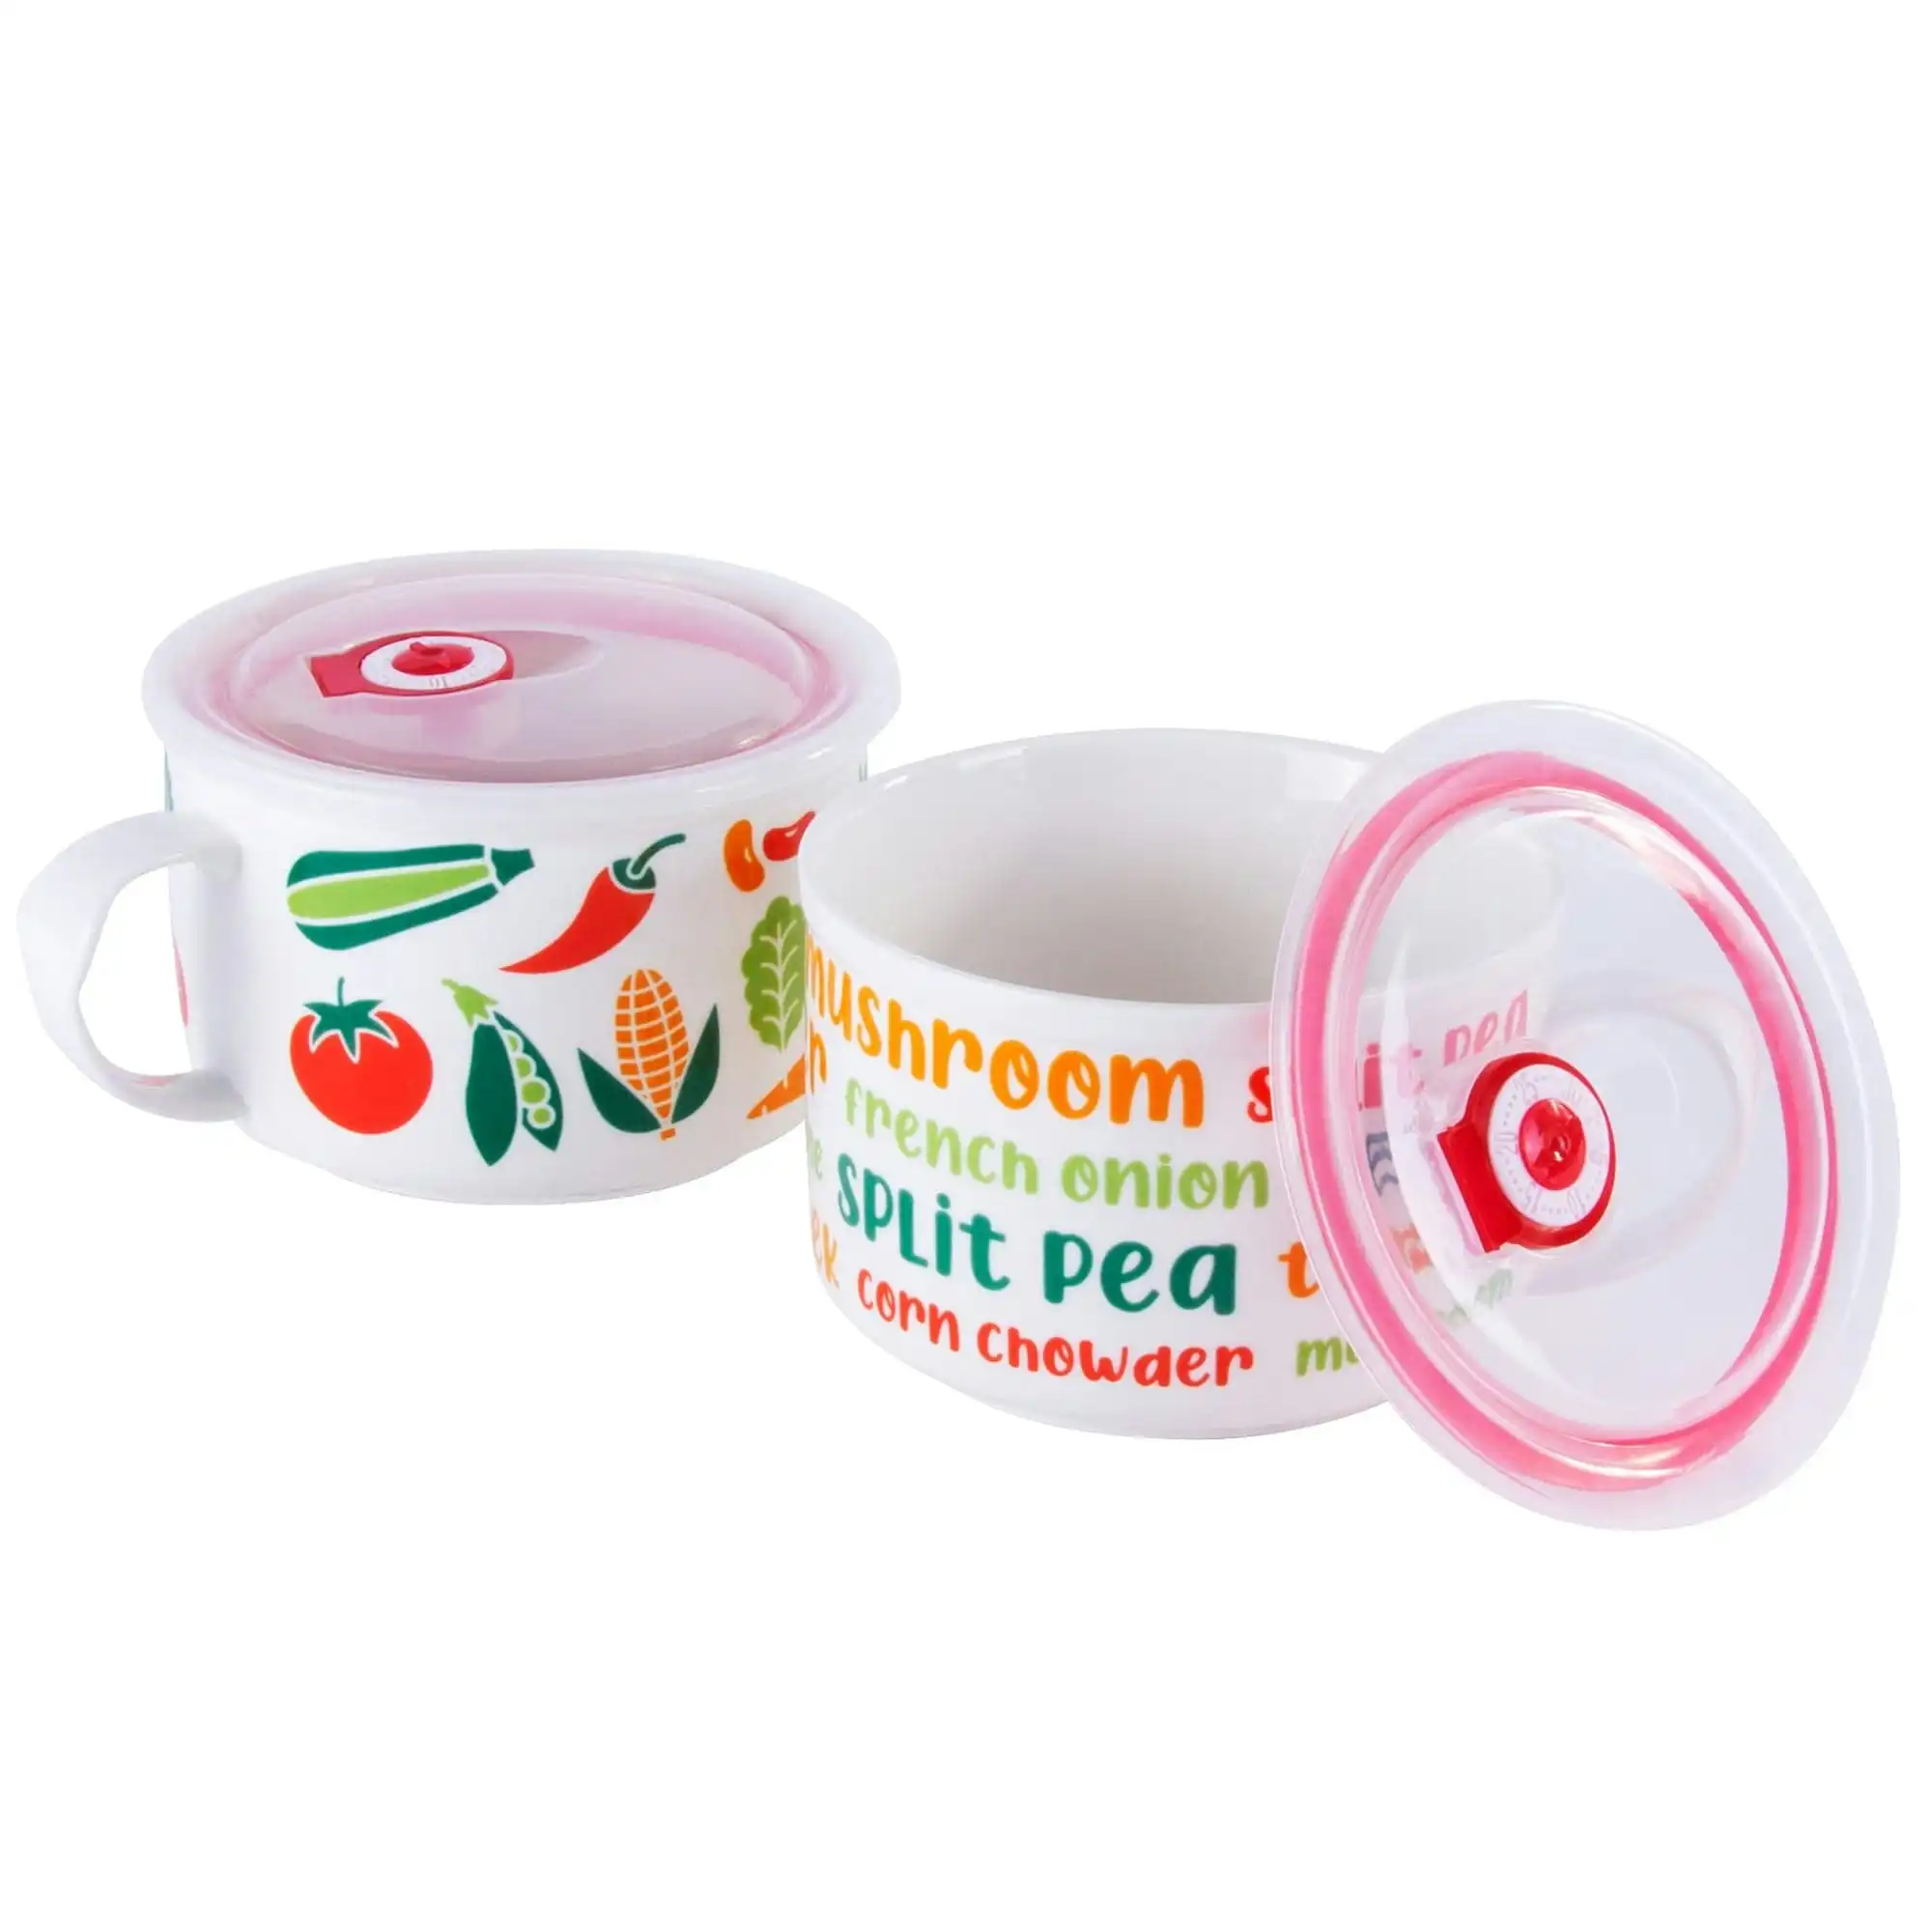 720ml Soup Mug with Silicone Seal Lid 2 Assorted